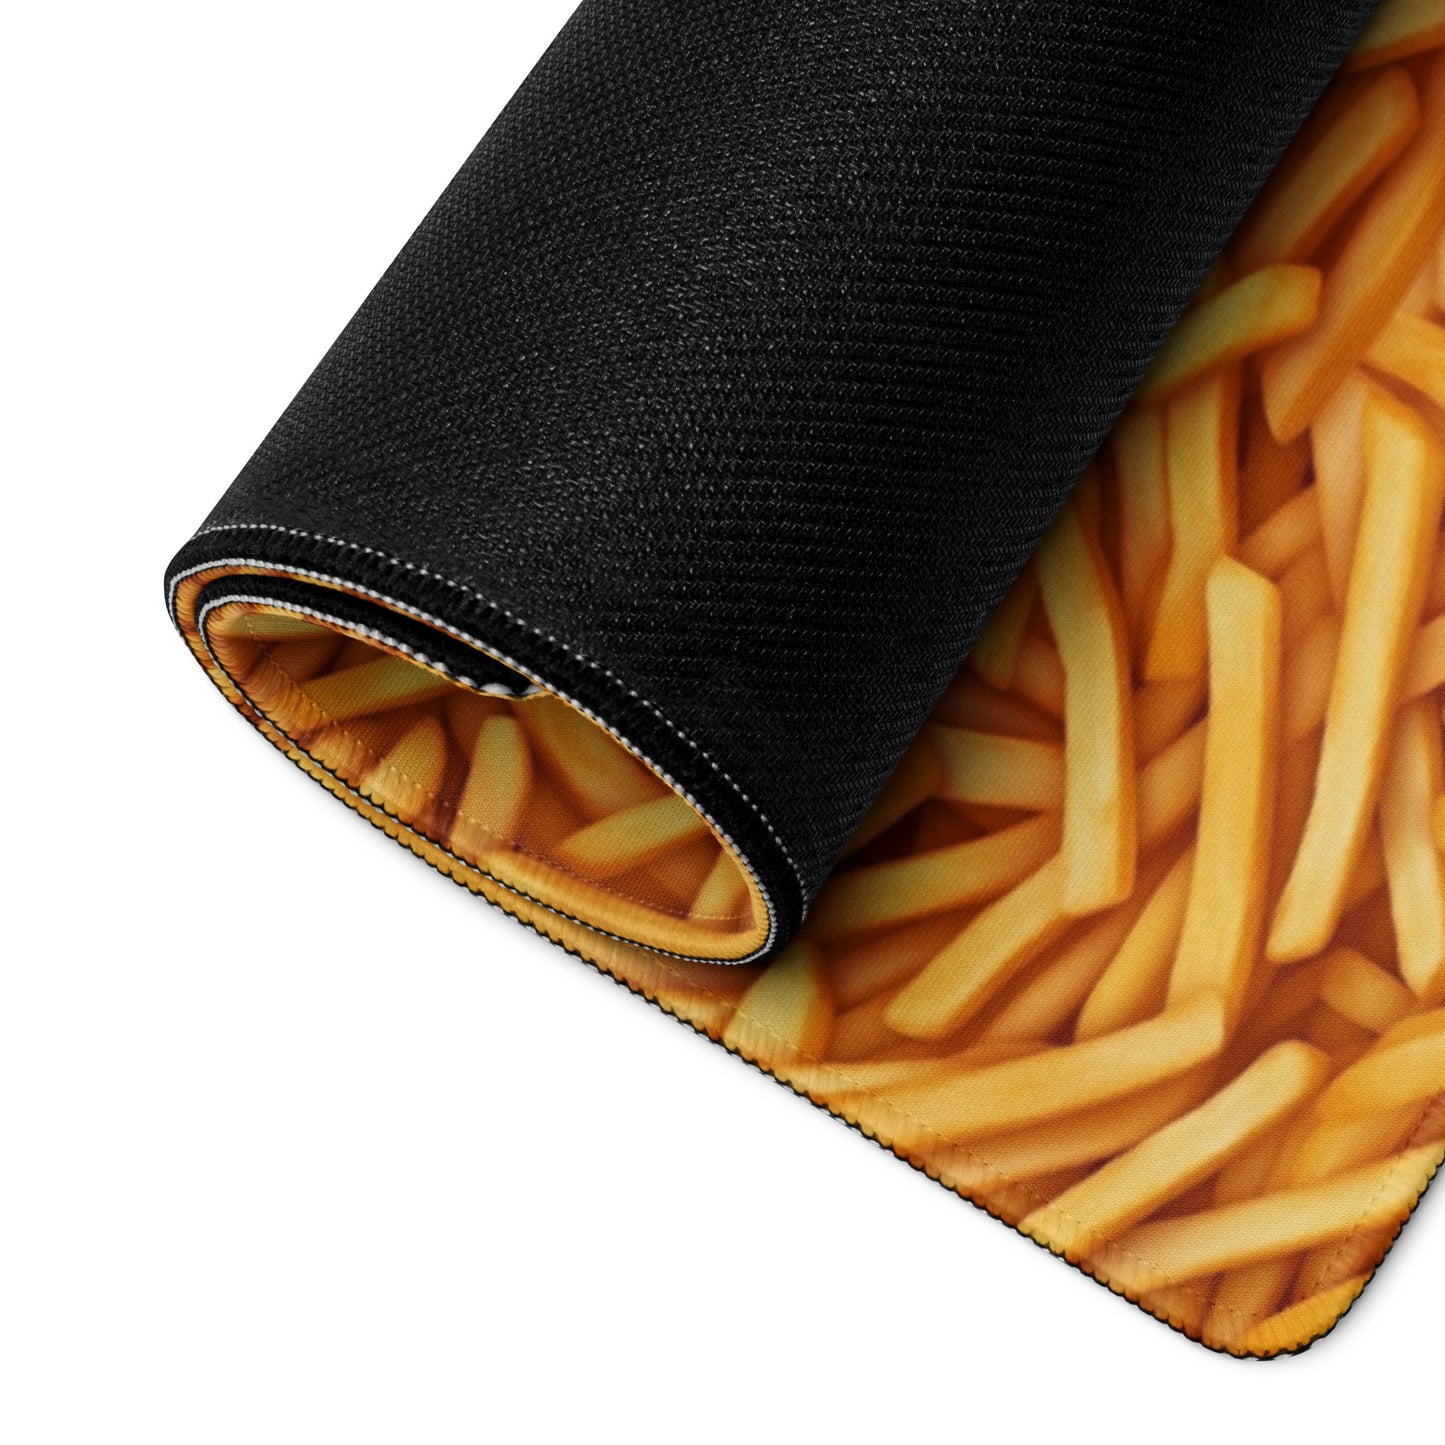 A 36" x 18" desk pad with a bunch of french fries all over it rolled up. Yellow in color.